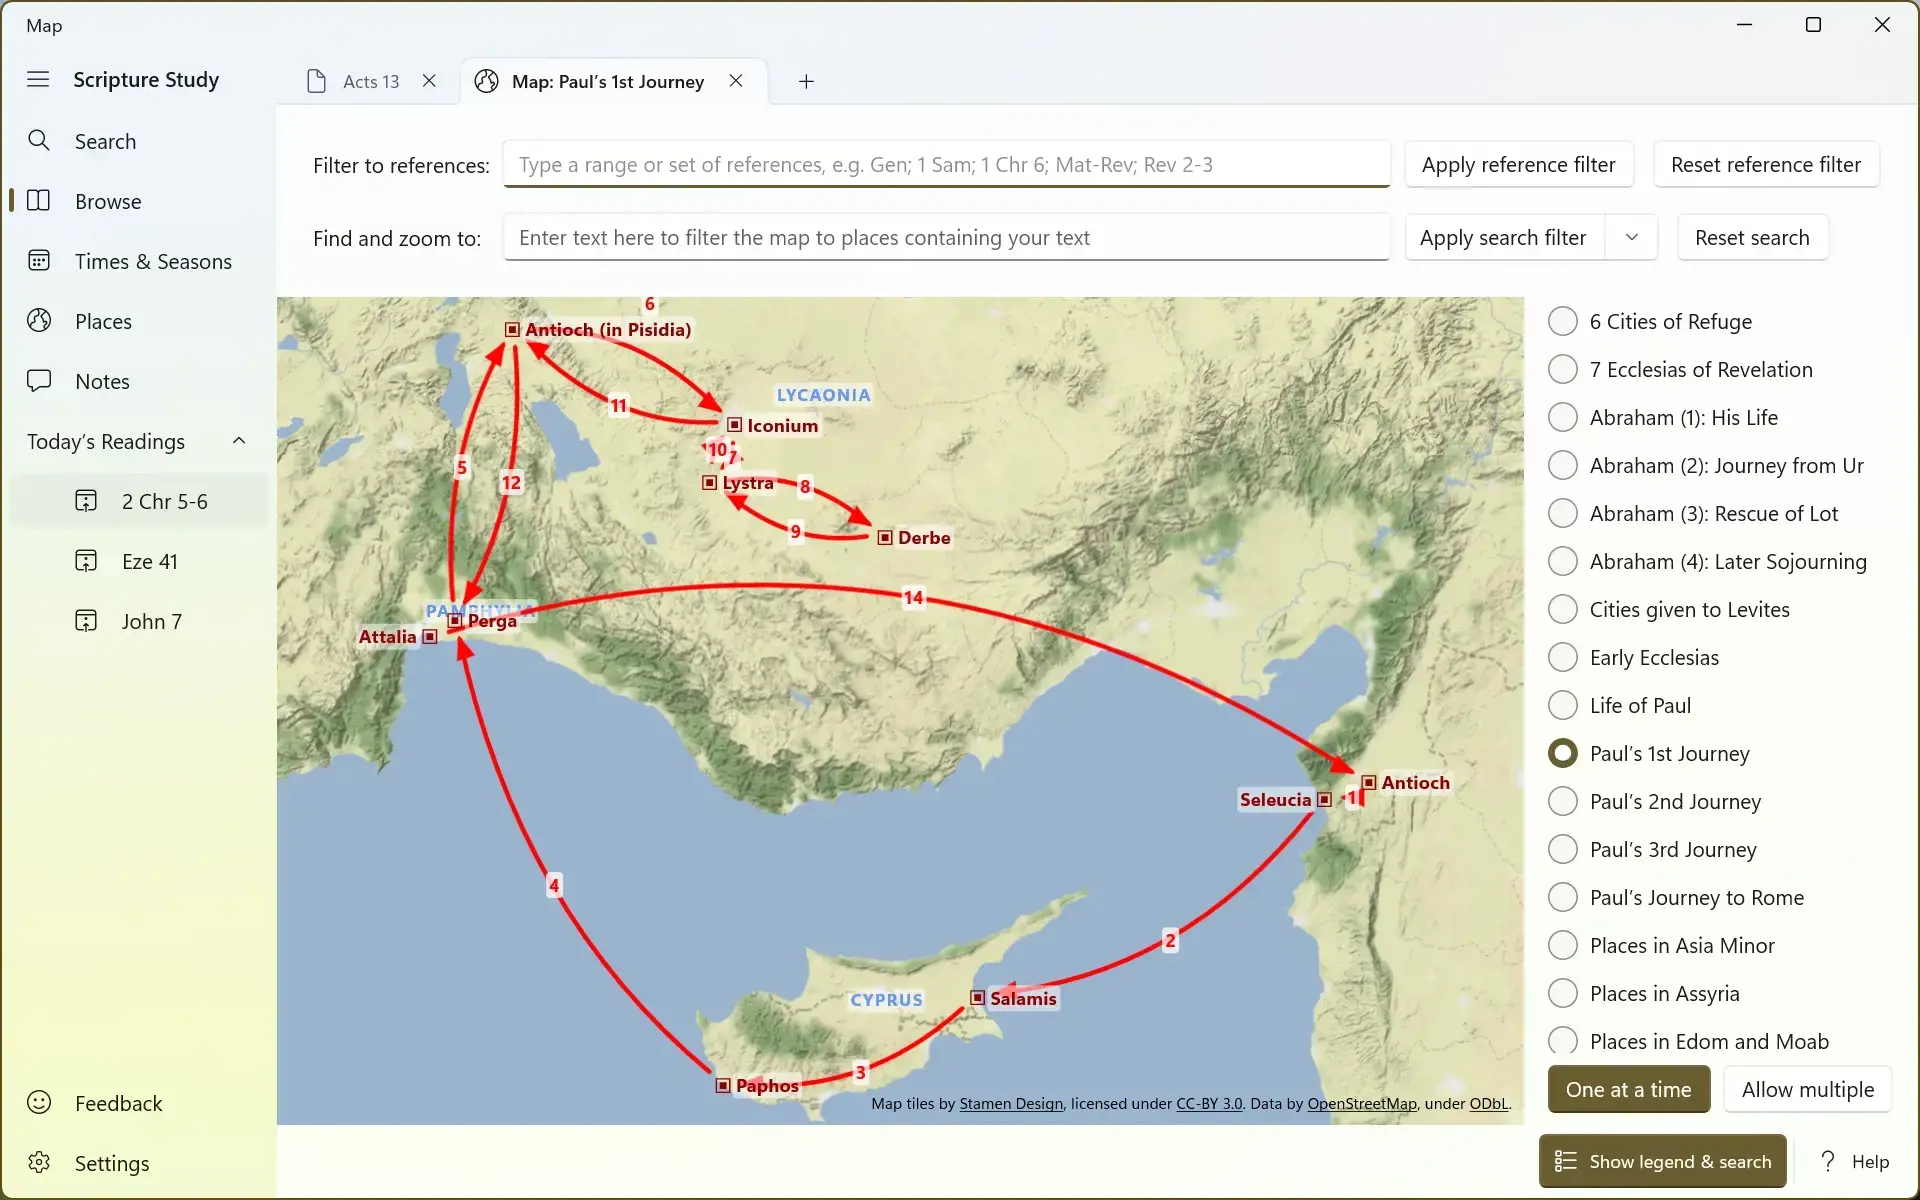 Screenshot showing a map of Paul's first journey